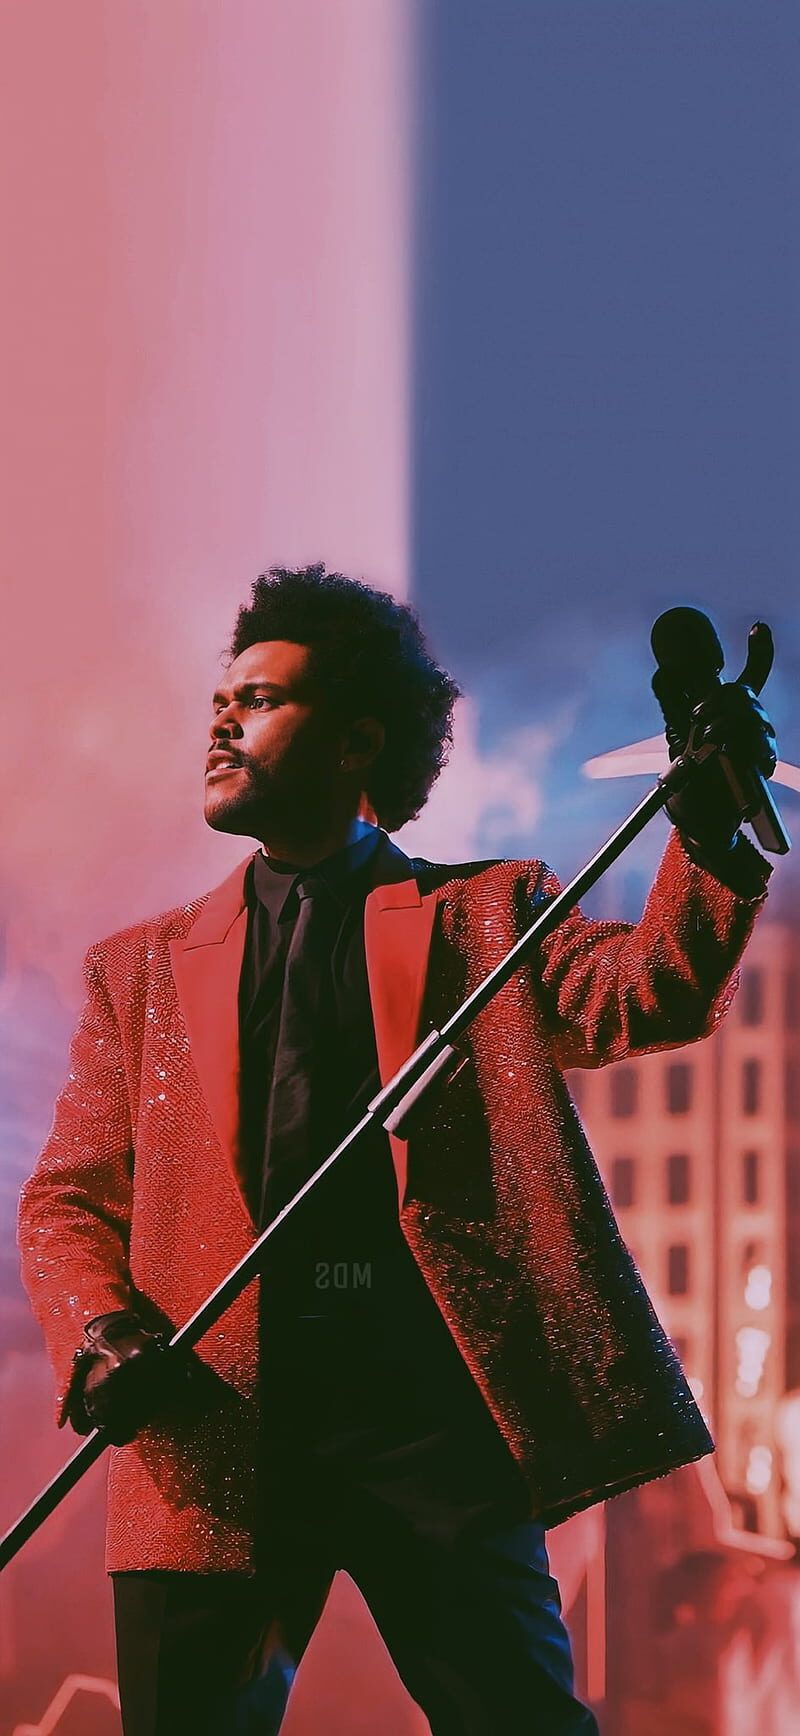 A man holding an umbrella and wearing red - The Weeknd